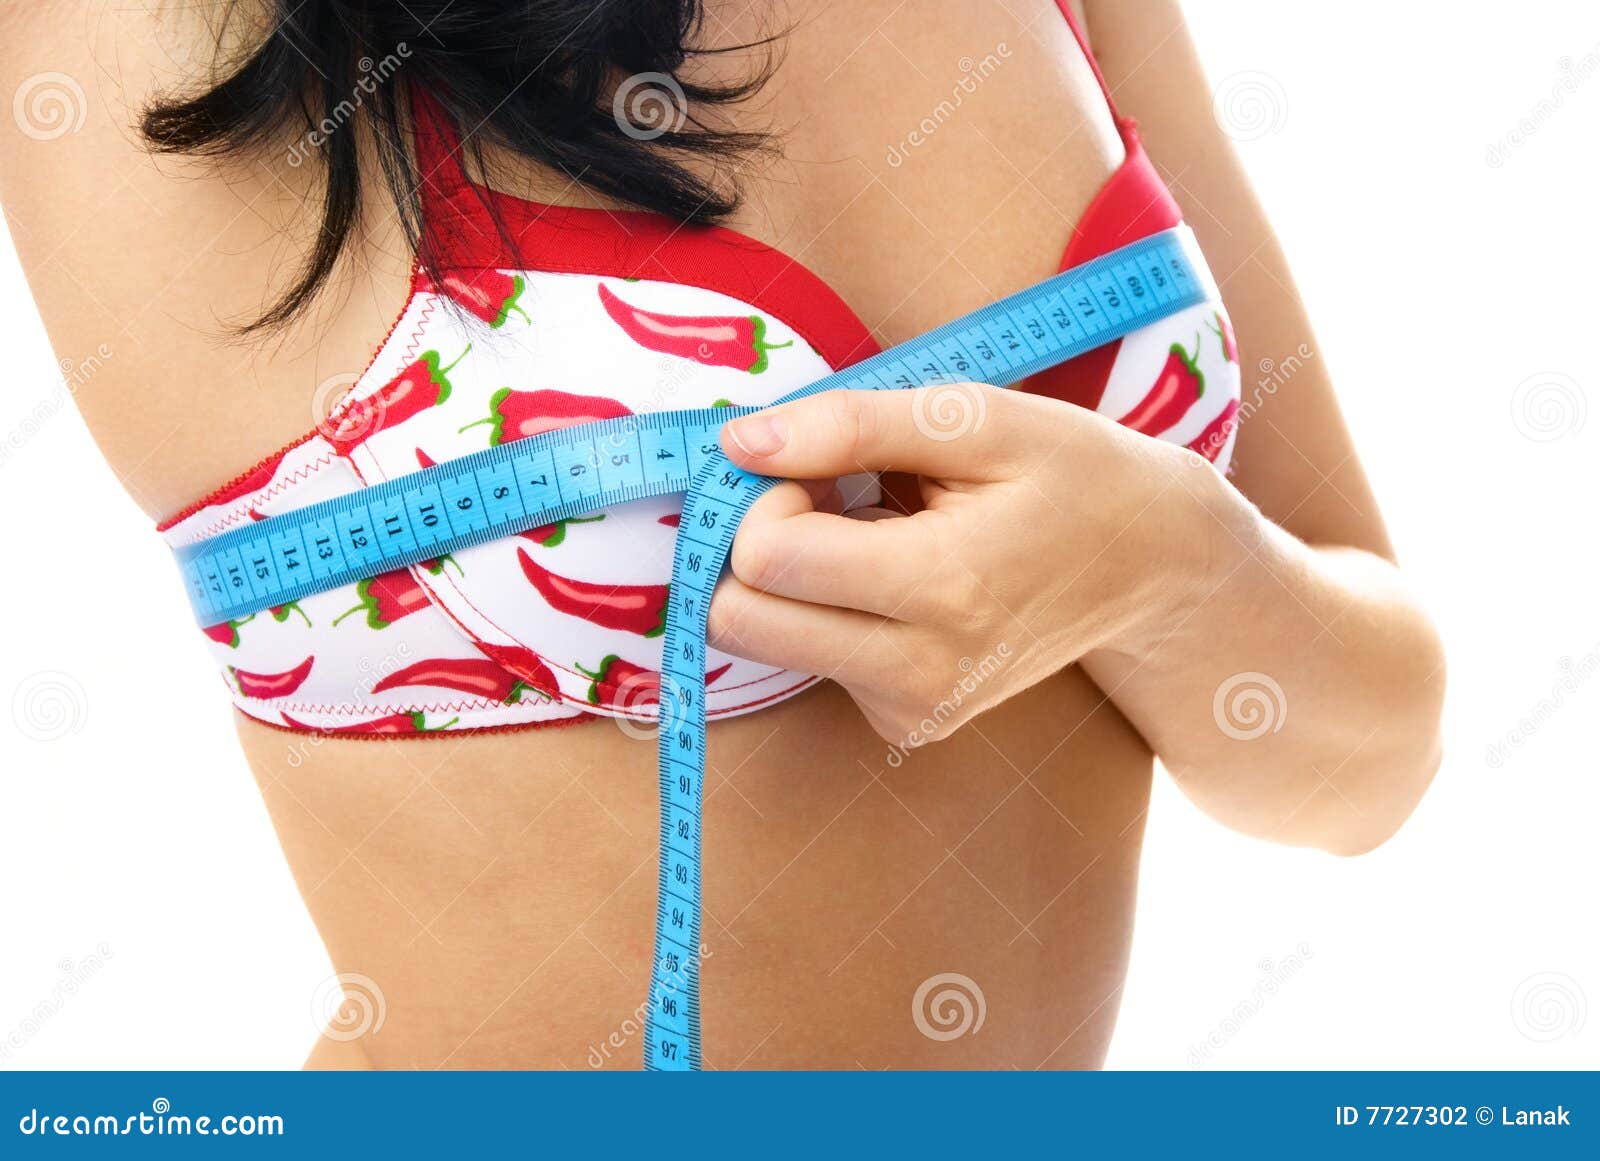 1,018 Woman Breast Tape Stock Photos - Free & Royalty-Free Stock